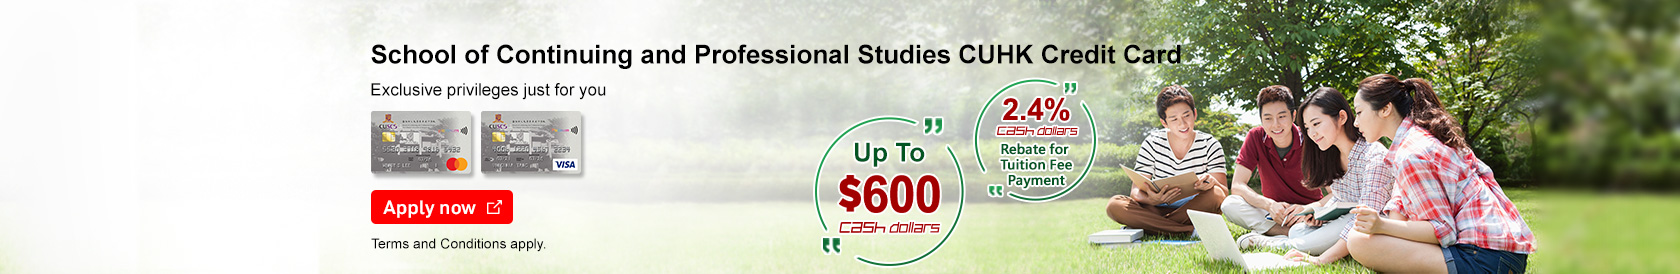 School of  Continuing and Professional Studies CUHK Credit Card